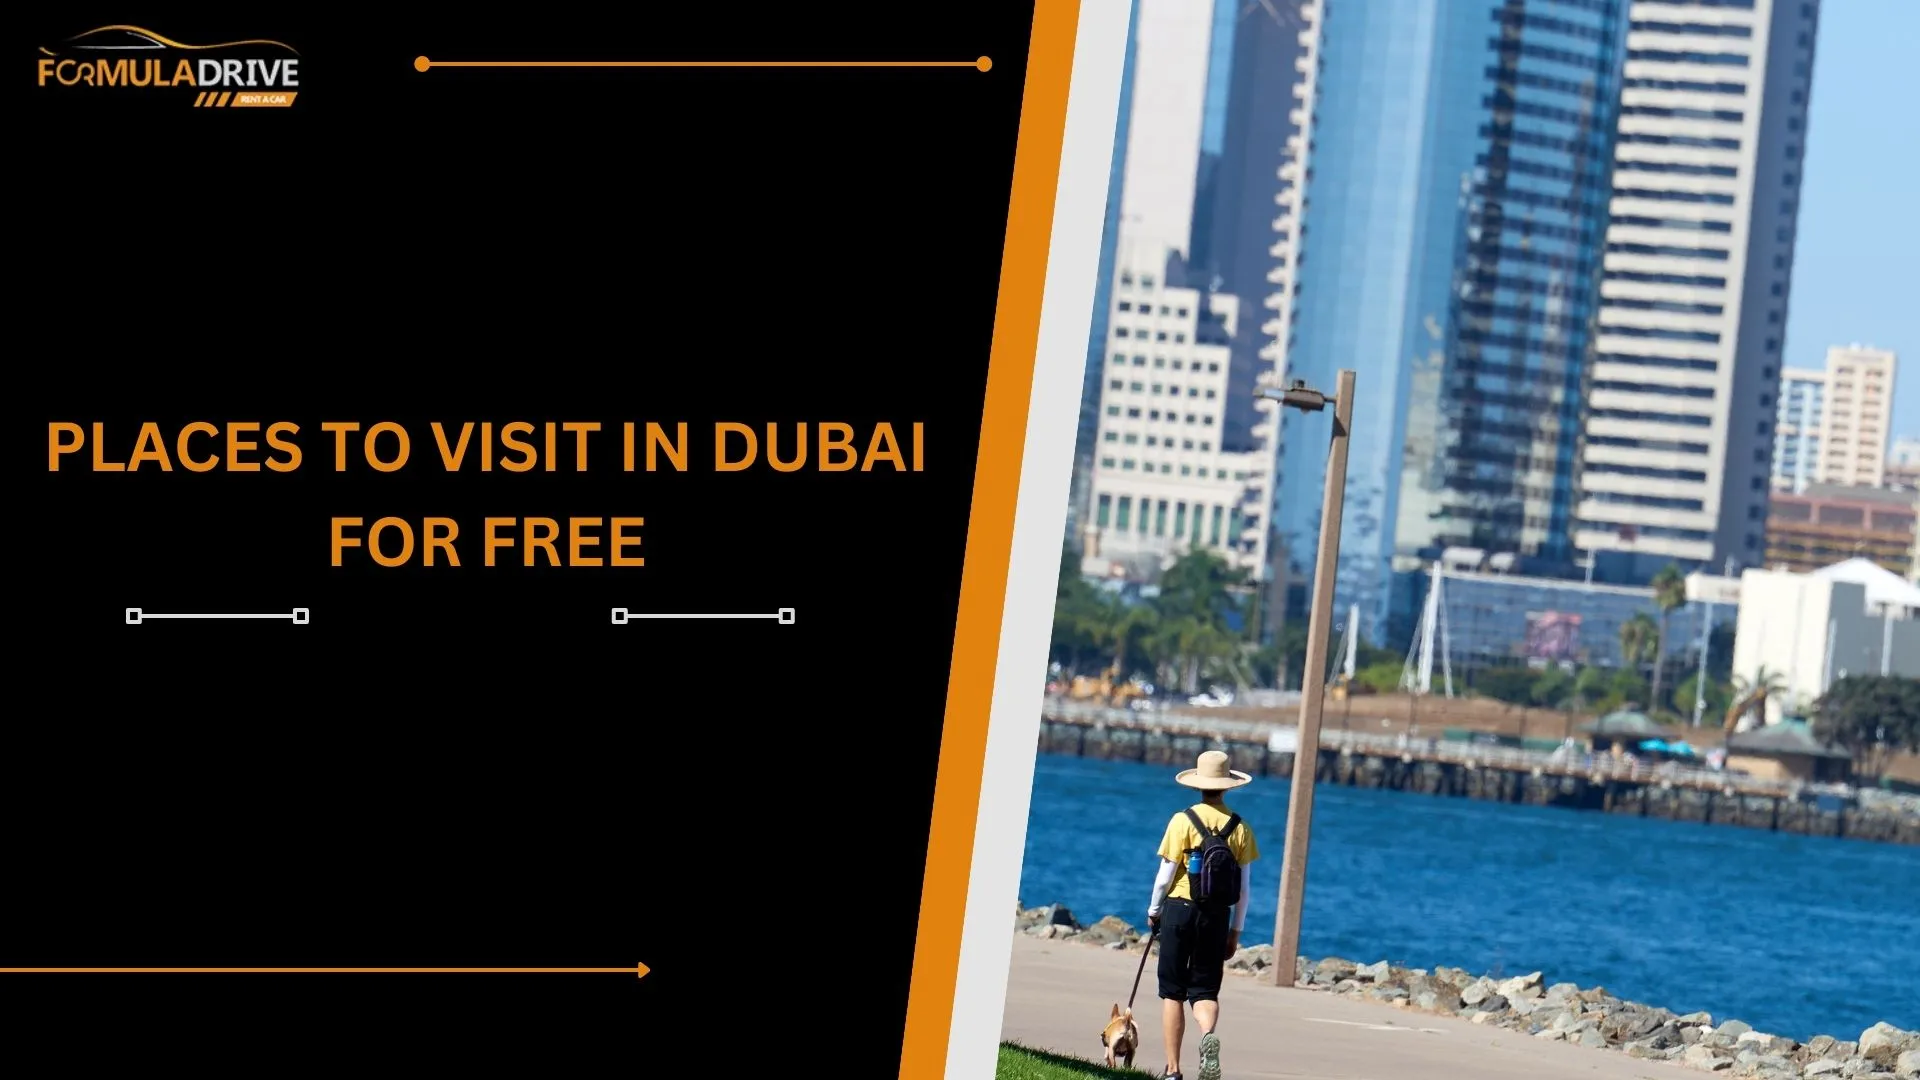 PLACES TO VISIT IN DUBAI FOR FREE